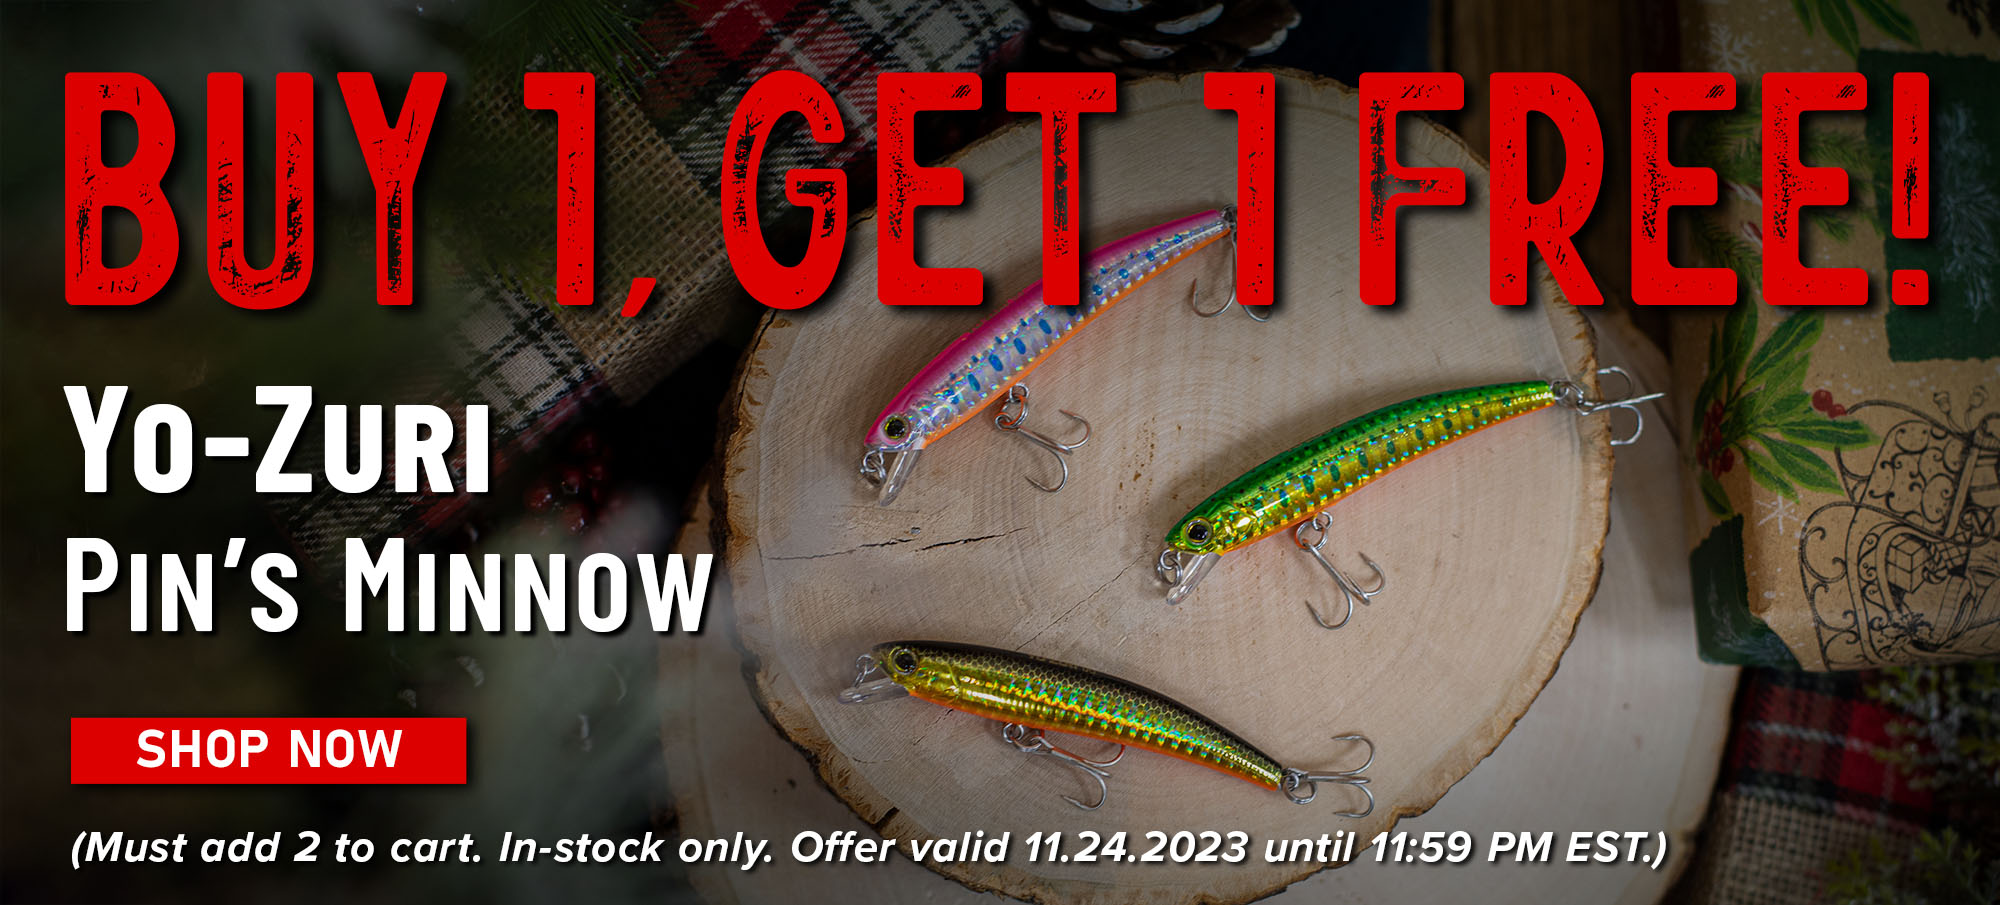 Buy 1, Get 1 Free! Yo-Zuri Pin's Minnow Shop Now (Must add 2 to cart. In-stock only. Offer valid 11.24.2023 until 11:59 PM EST.)